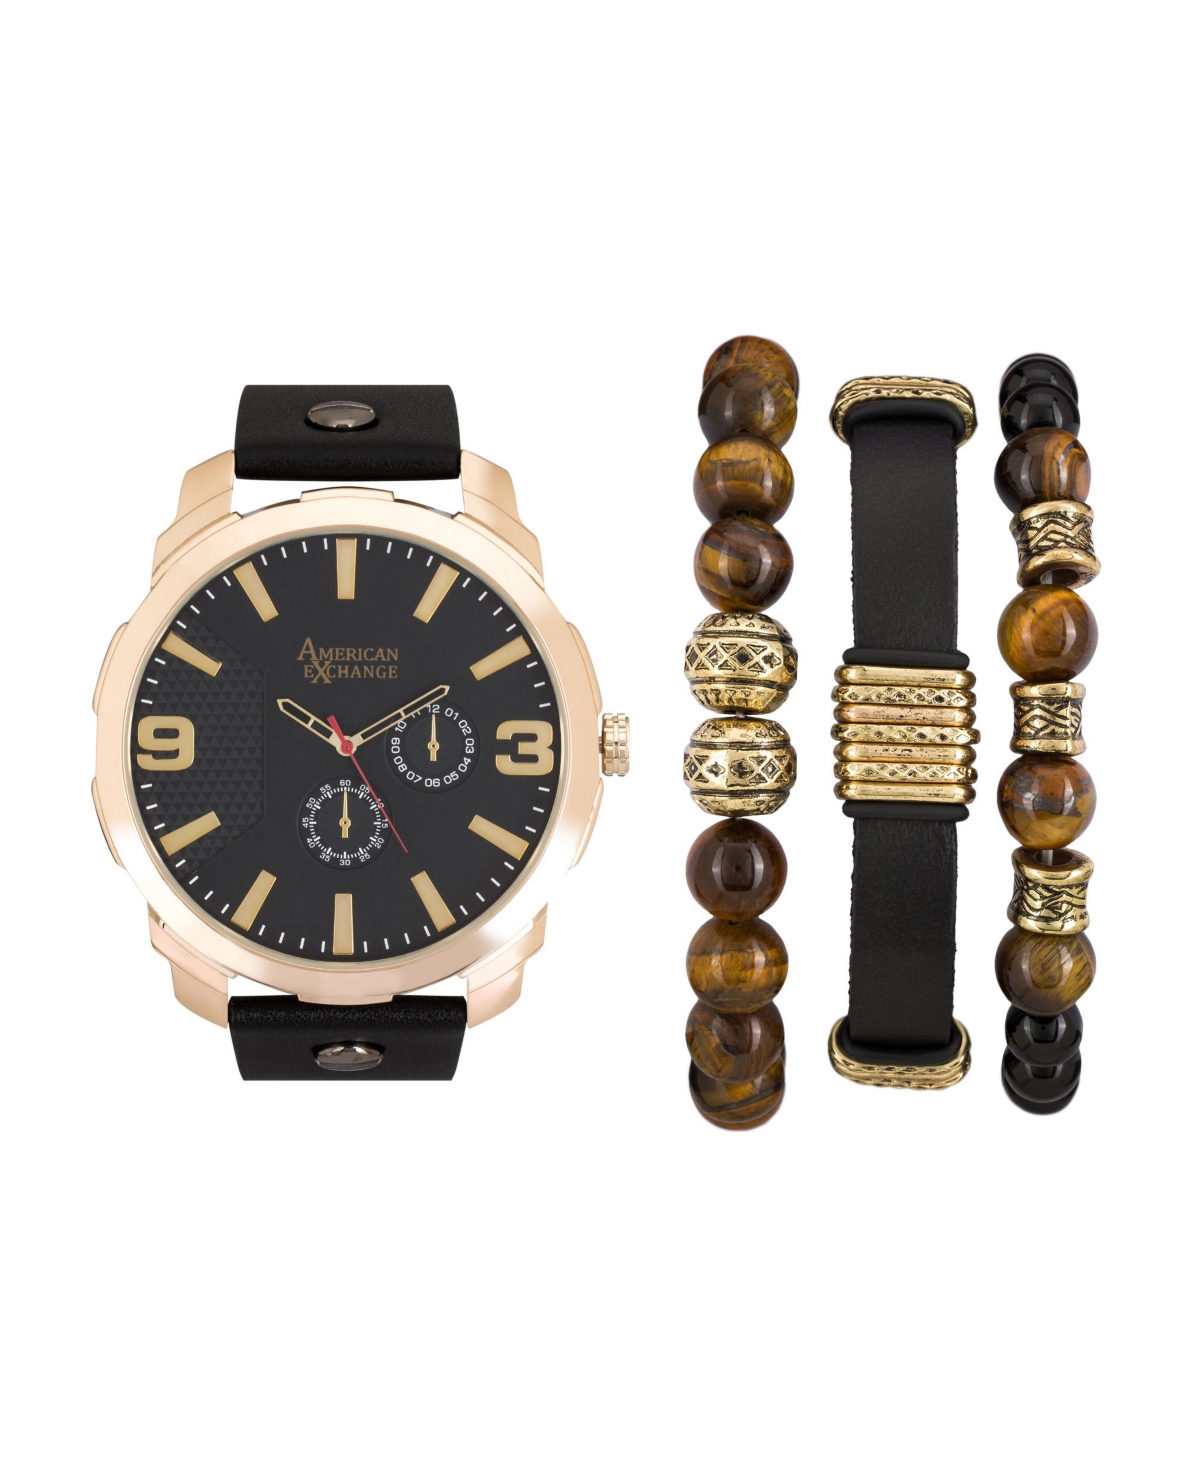 Men's Black/Gold Analog Quartz Watch And Holiday Stackable Gift Set - Black/gold